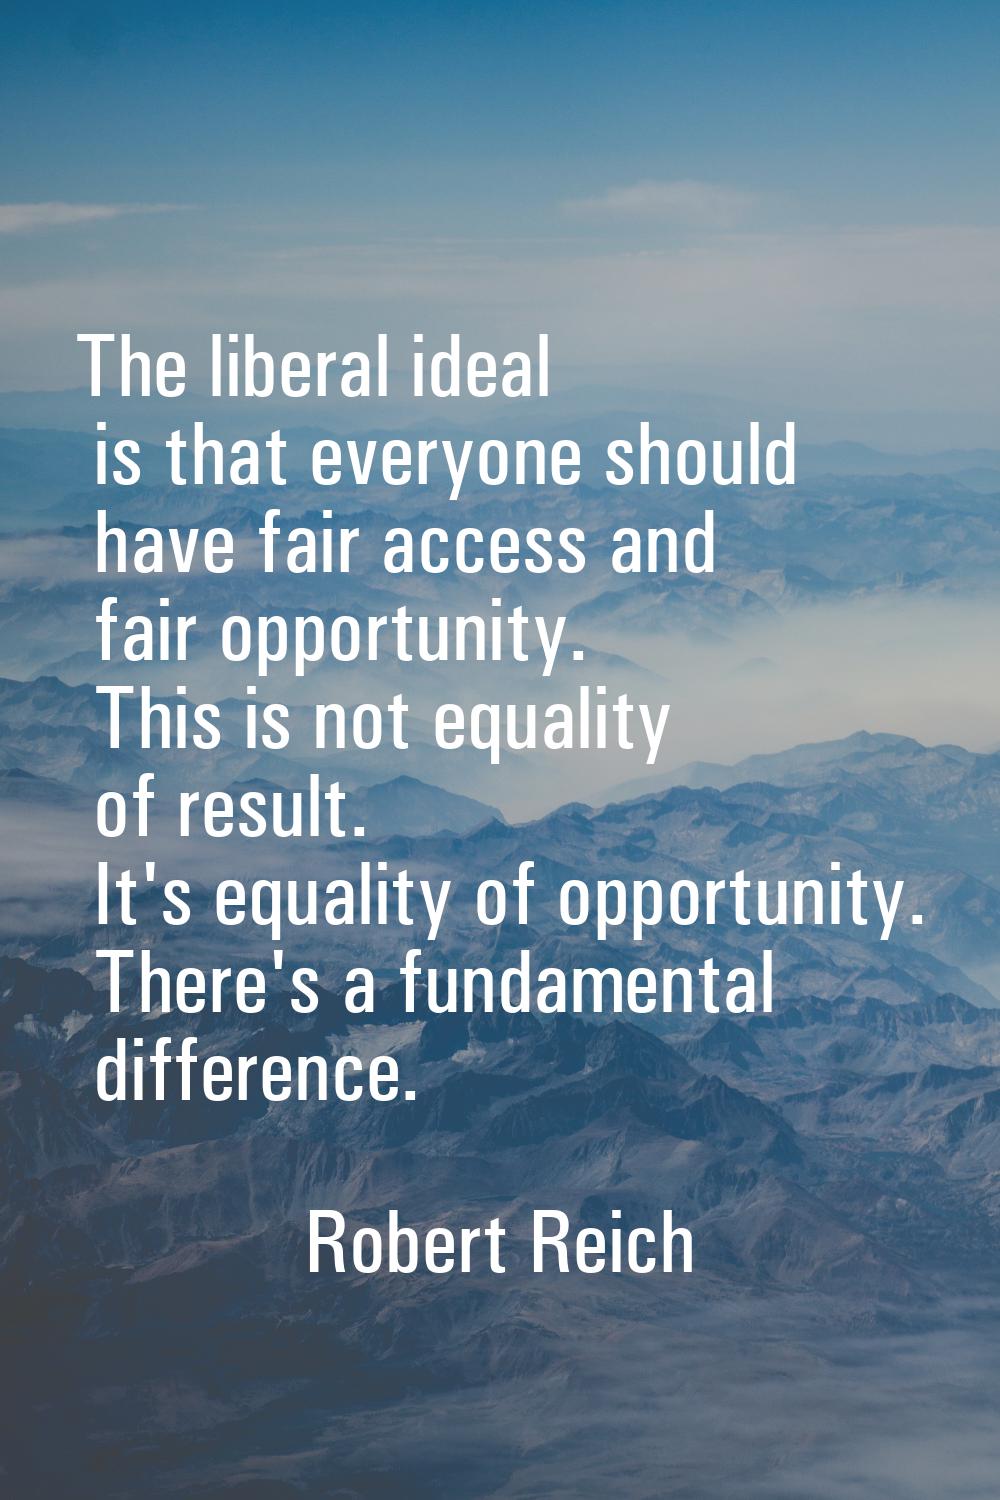 The liberal ideal is that everyone should have fair access and fair opportunity. This is not equali